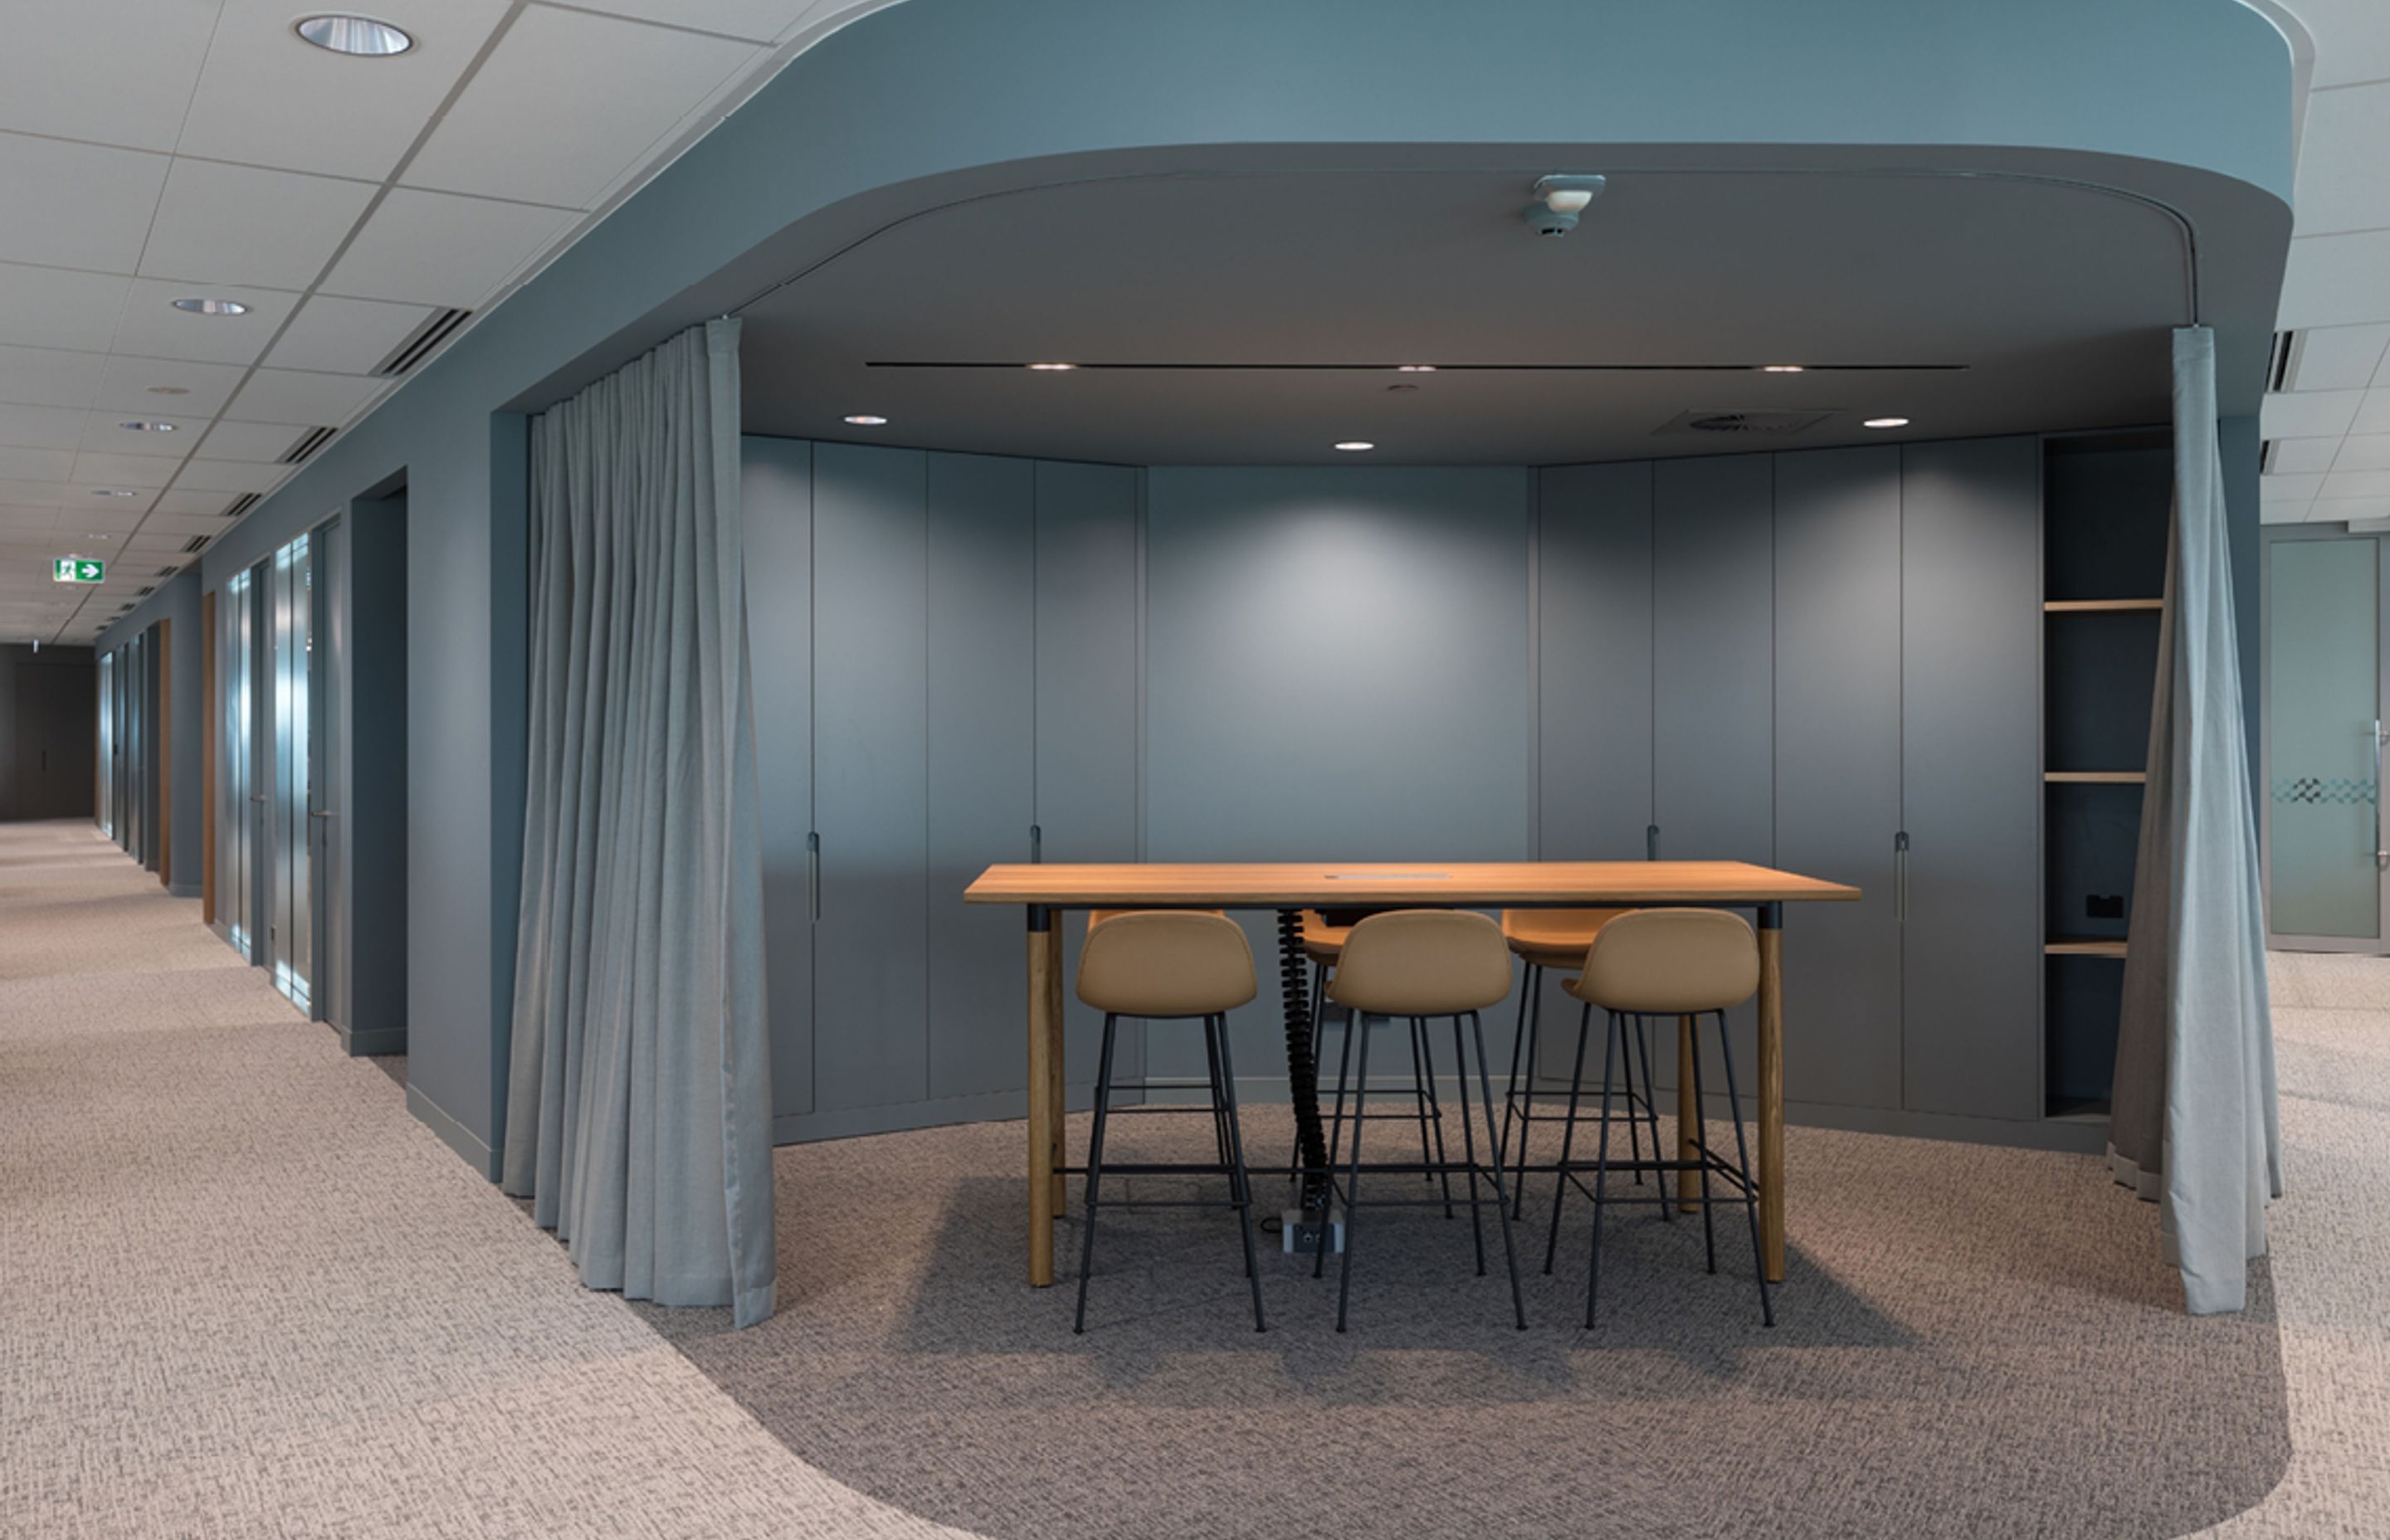 Heritage Carpets supplied two colour ways in the subtle, organic pattern of modulyss' DSGN Absolute carpet for this law firm fitout to bring a softness to the corporate space and to visually separate zones.